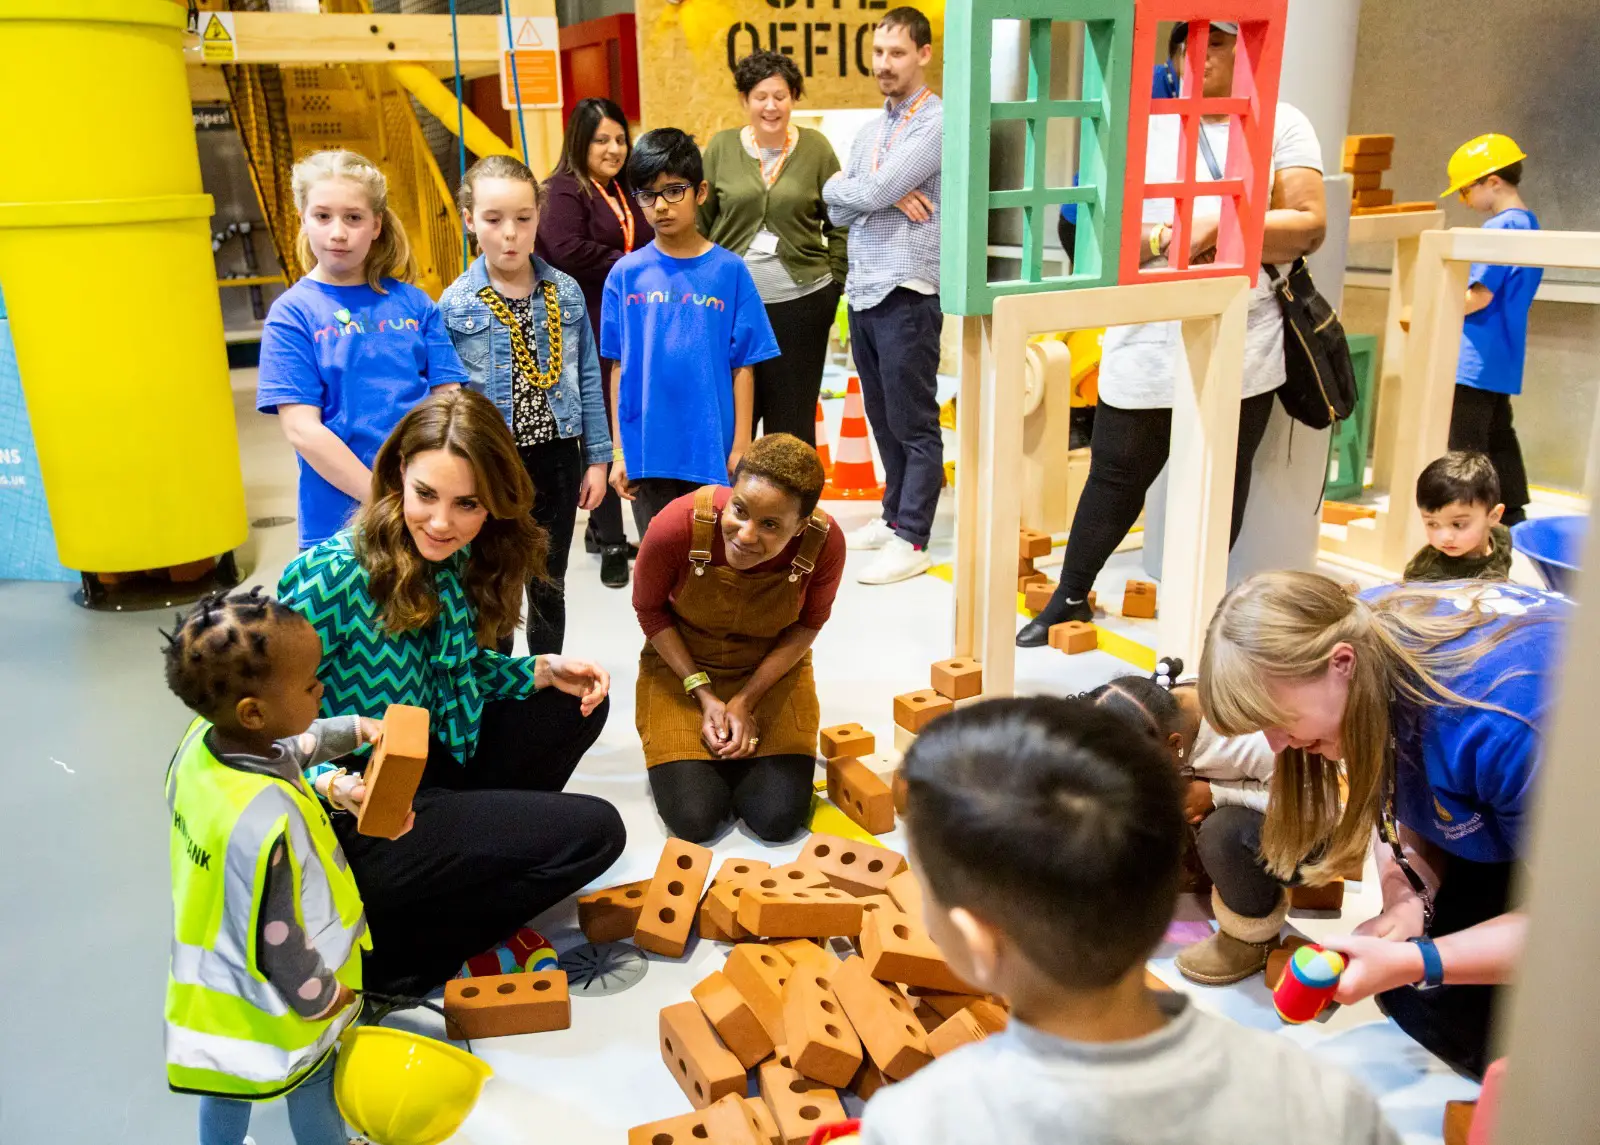 The Duchess of Cambridge launched 5 Big Questions under her Early Years Intervention Project